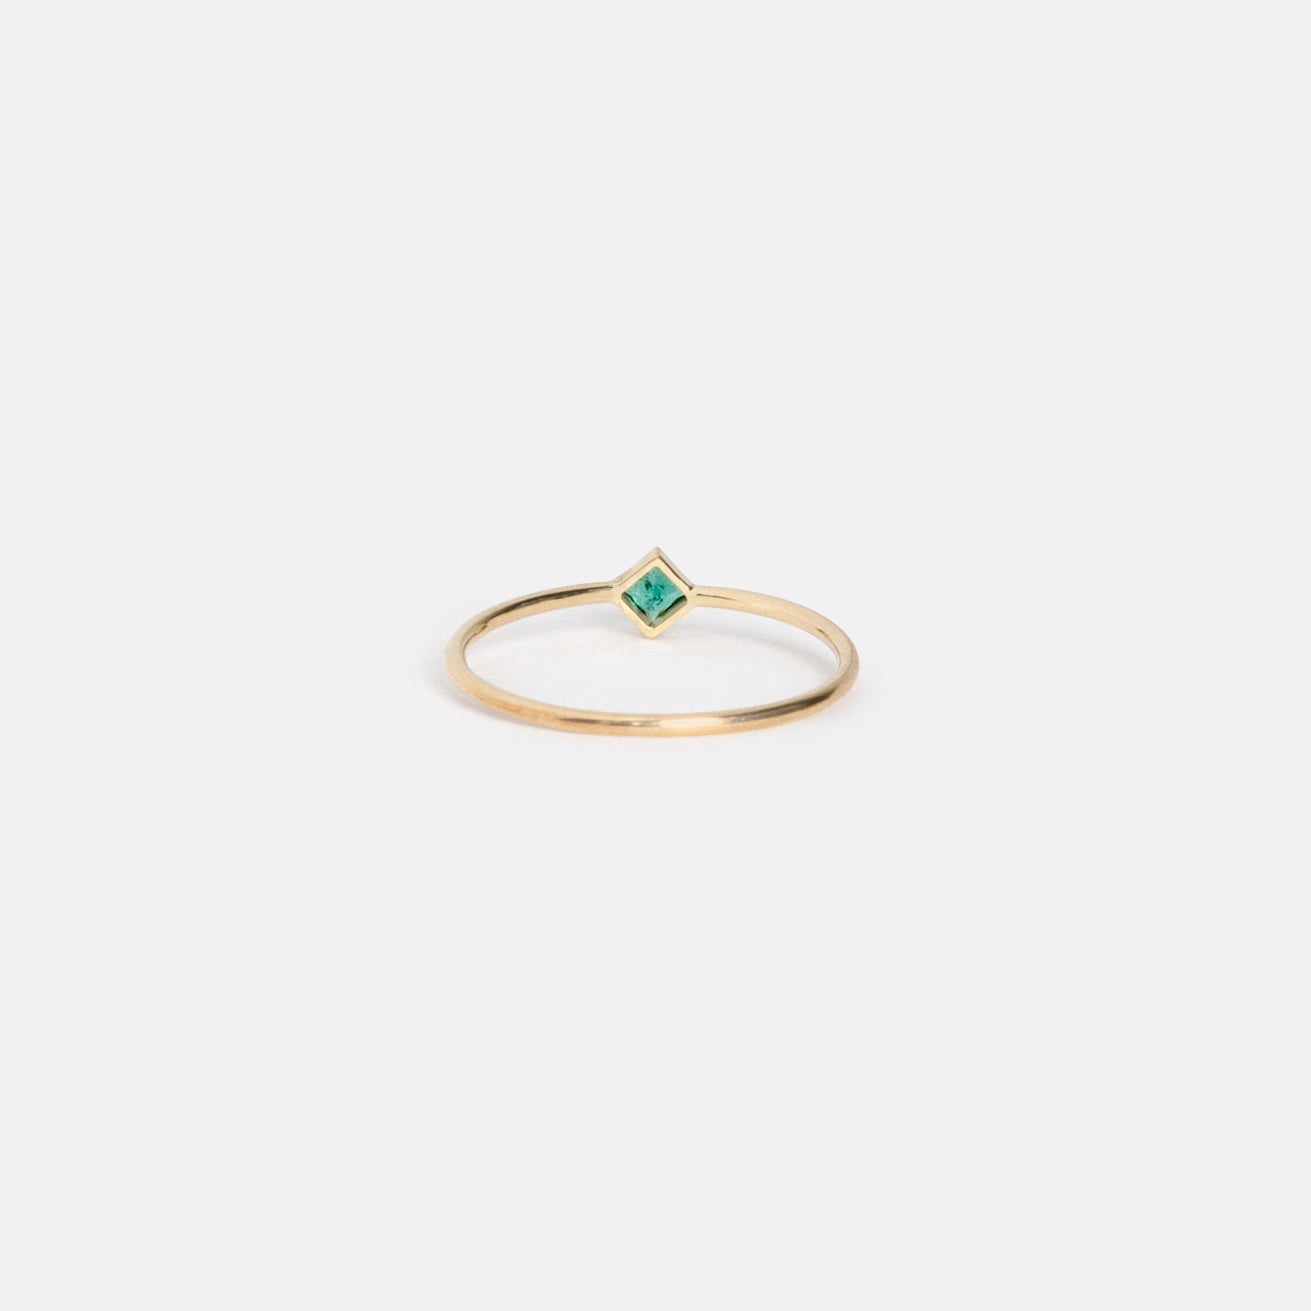 Small Ona Minimal Ring in 14k Gold set with Emerald by SHW Fine Jewelry